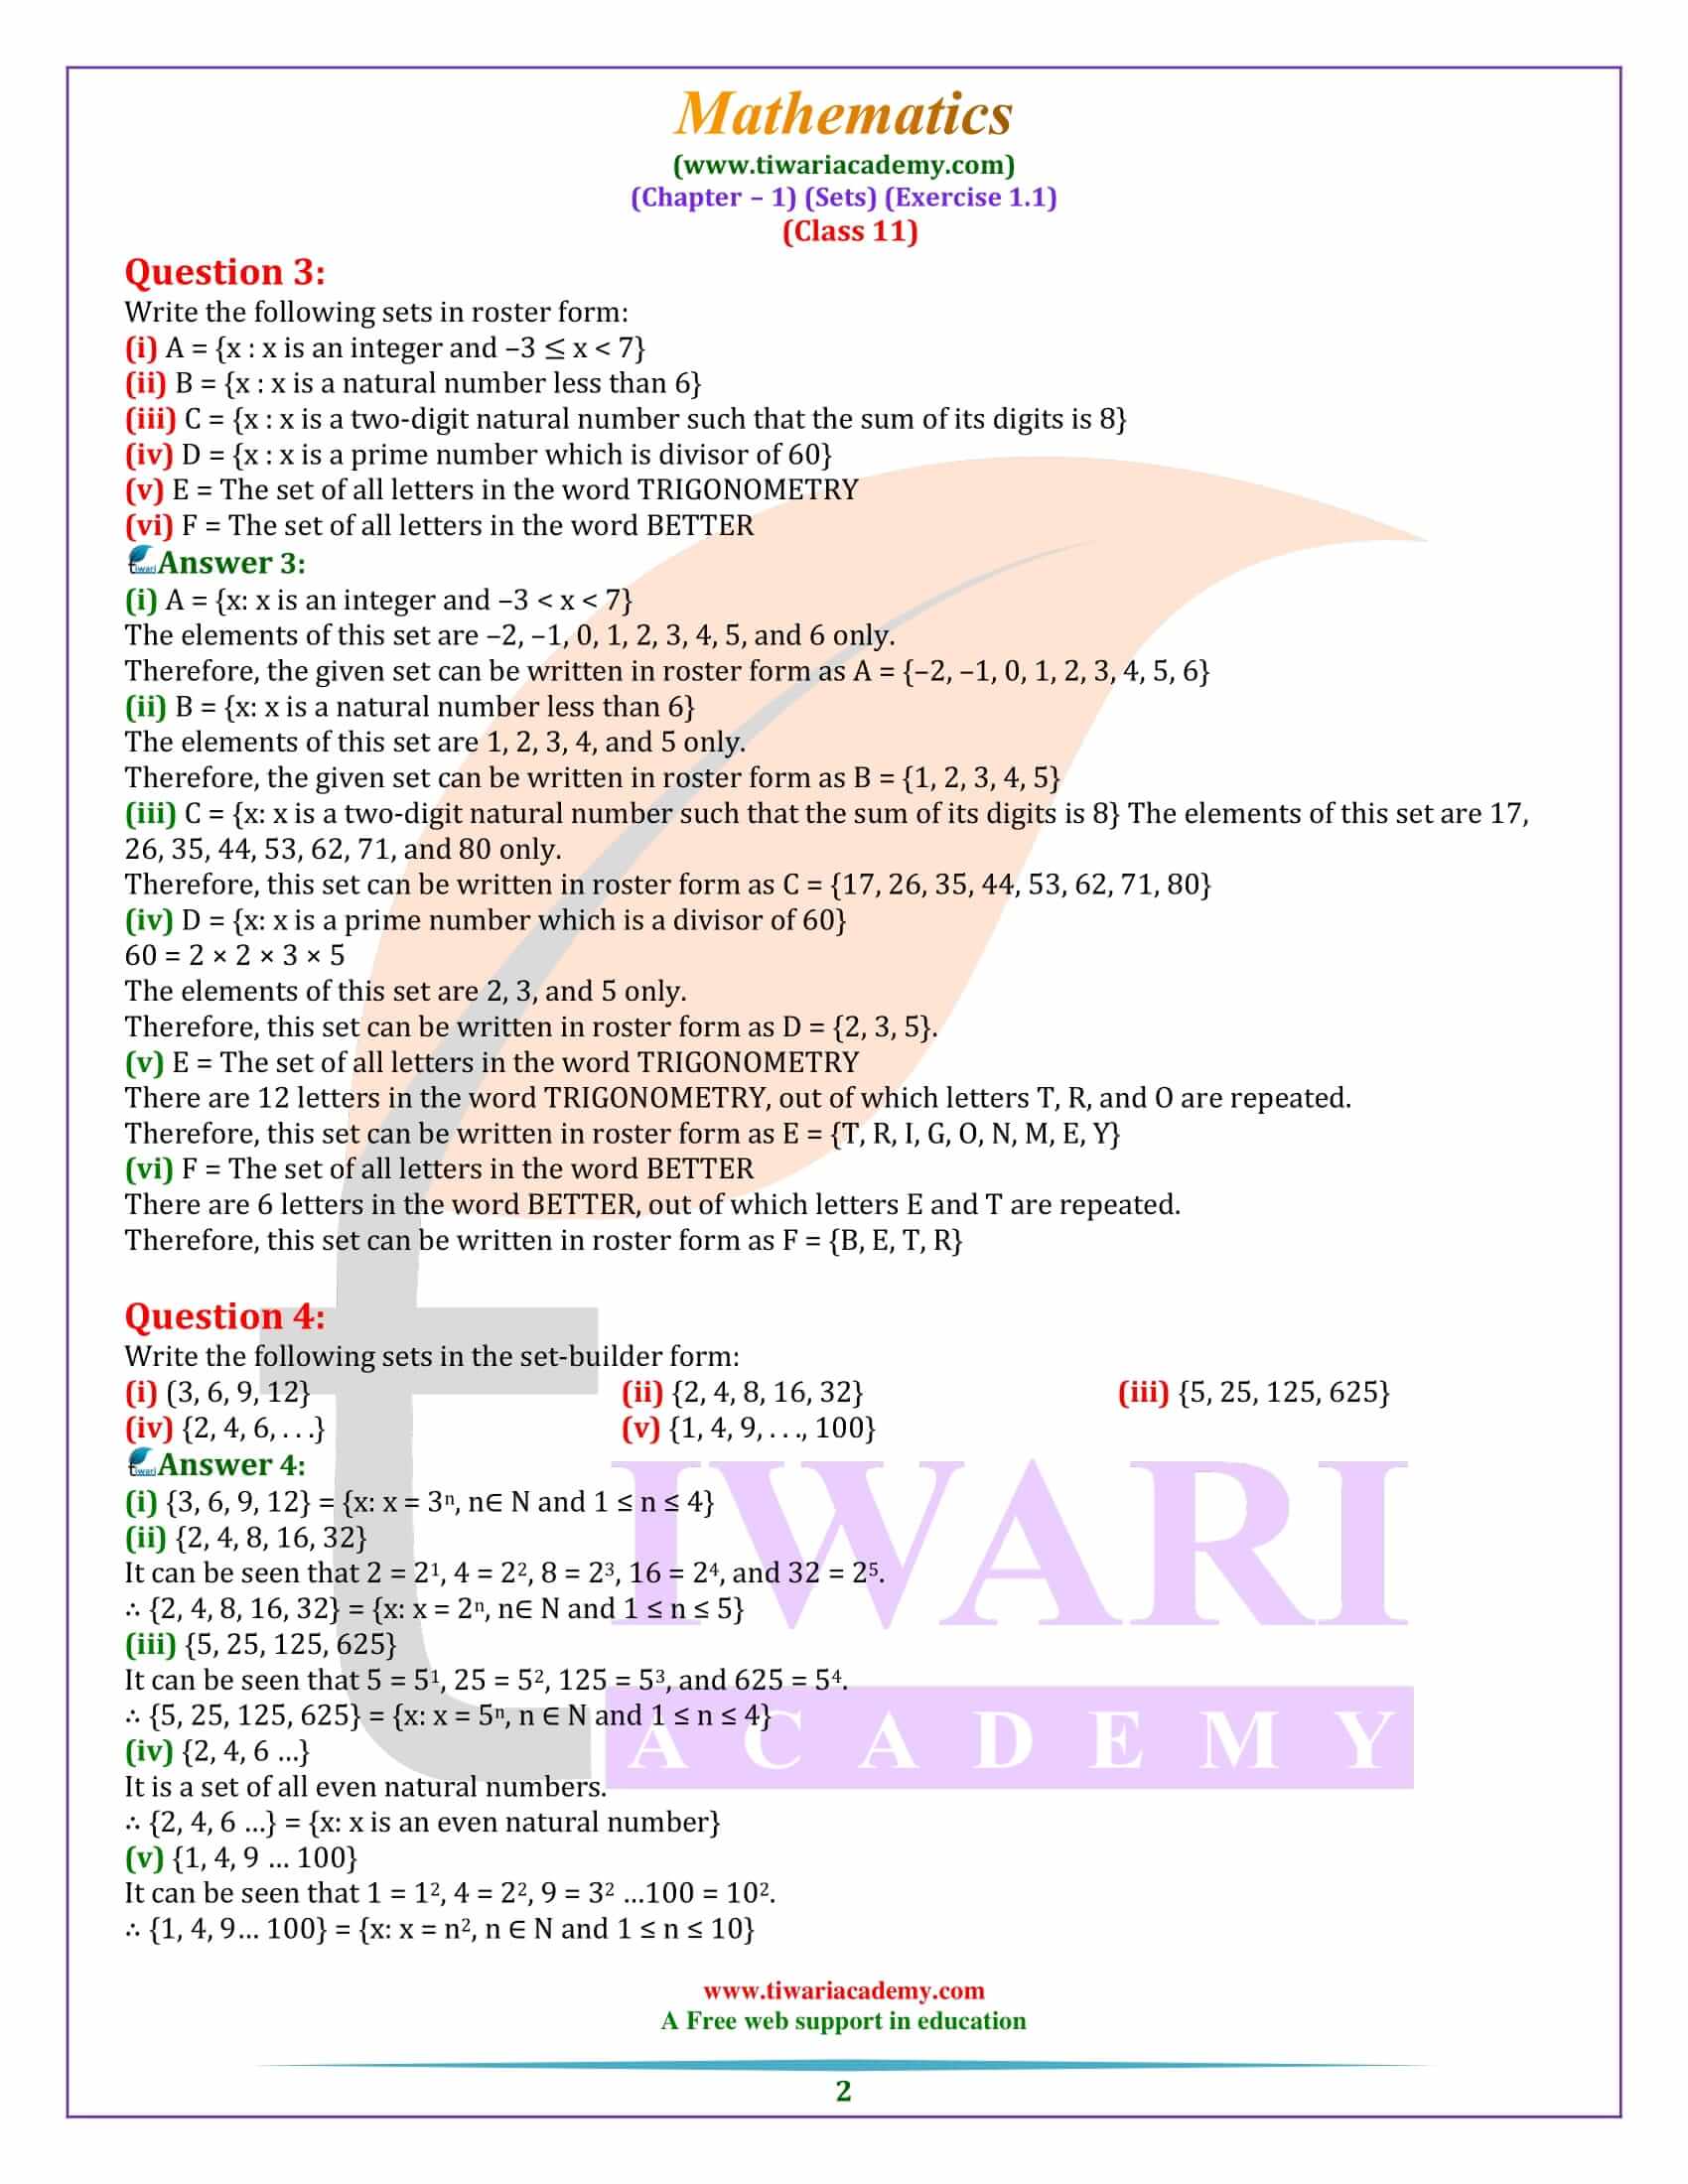 NCERT Solutions for Class 11 Maths Exercise 1.1 in Hindi and English medium